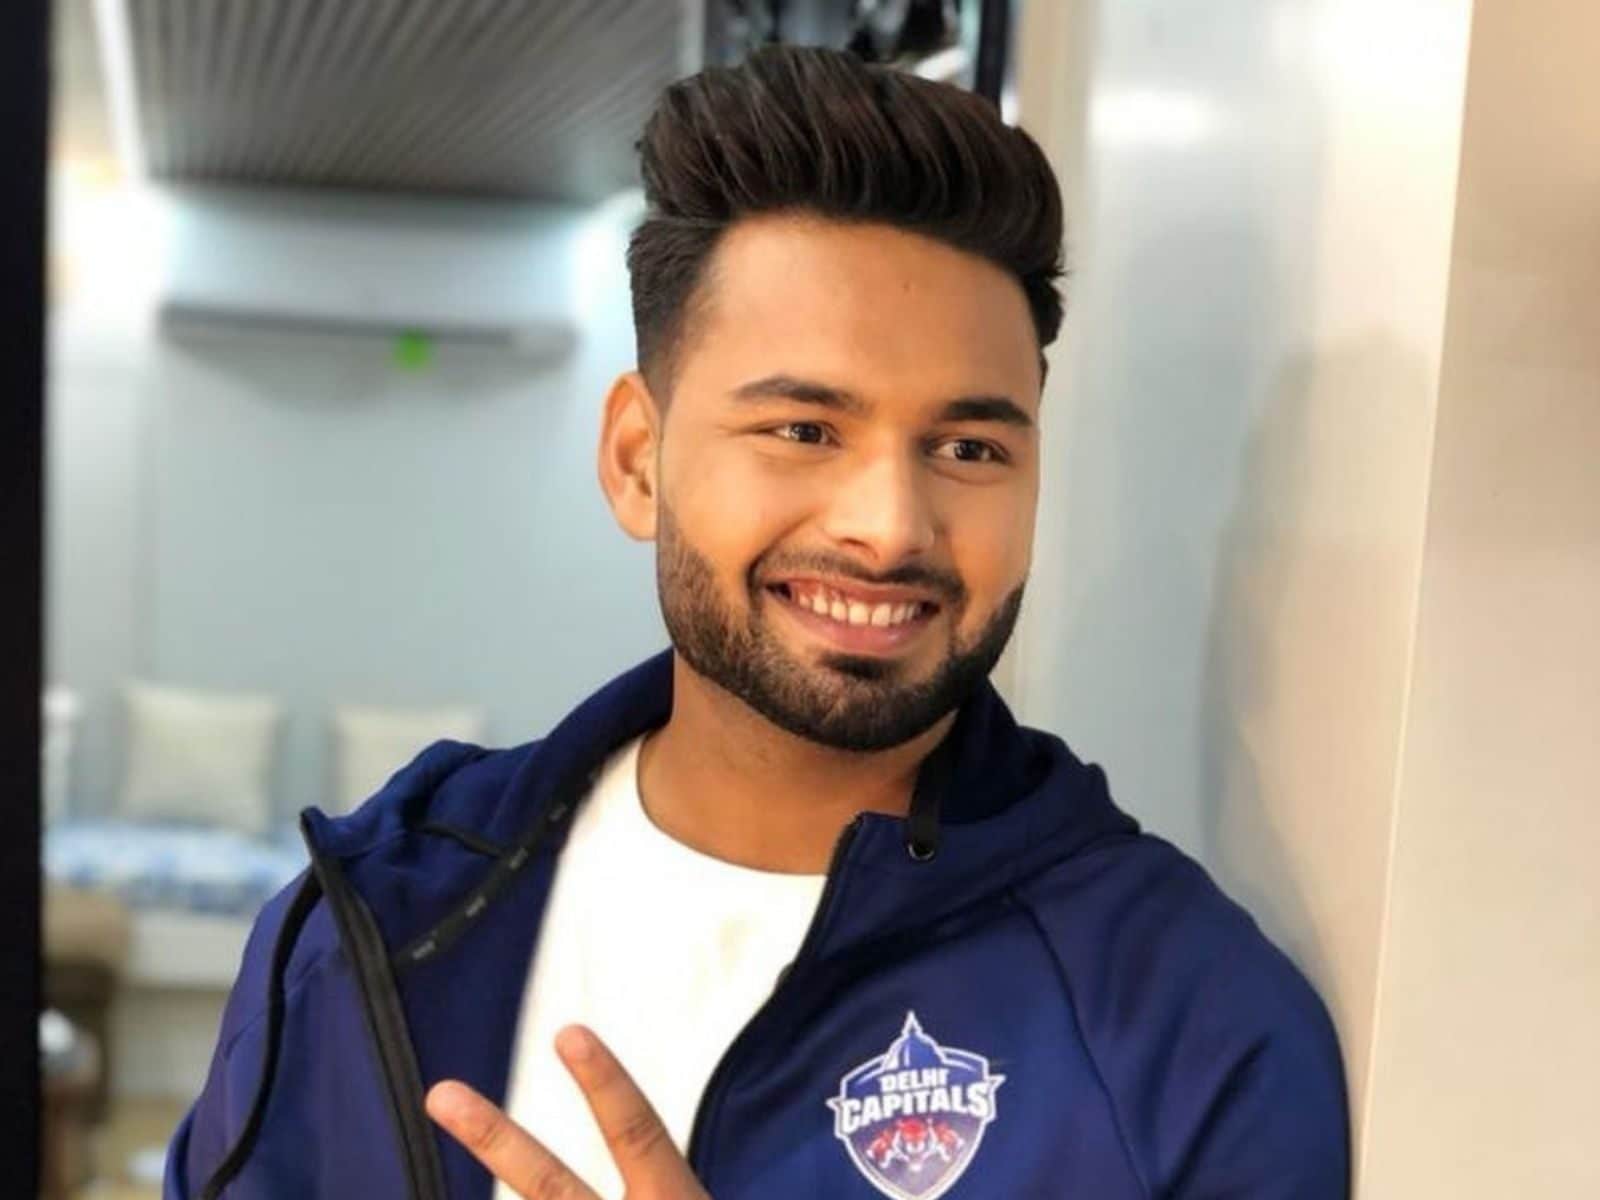 Come 2019 World Cup Should Rishabh Pant Be Selected For The Indian Roster